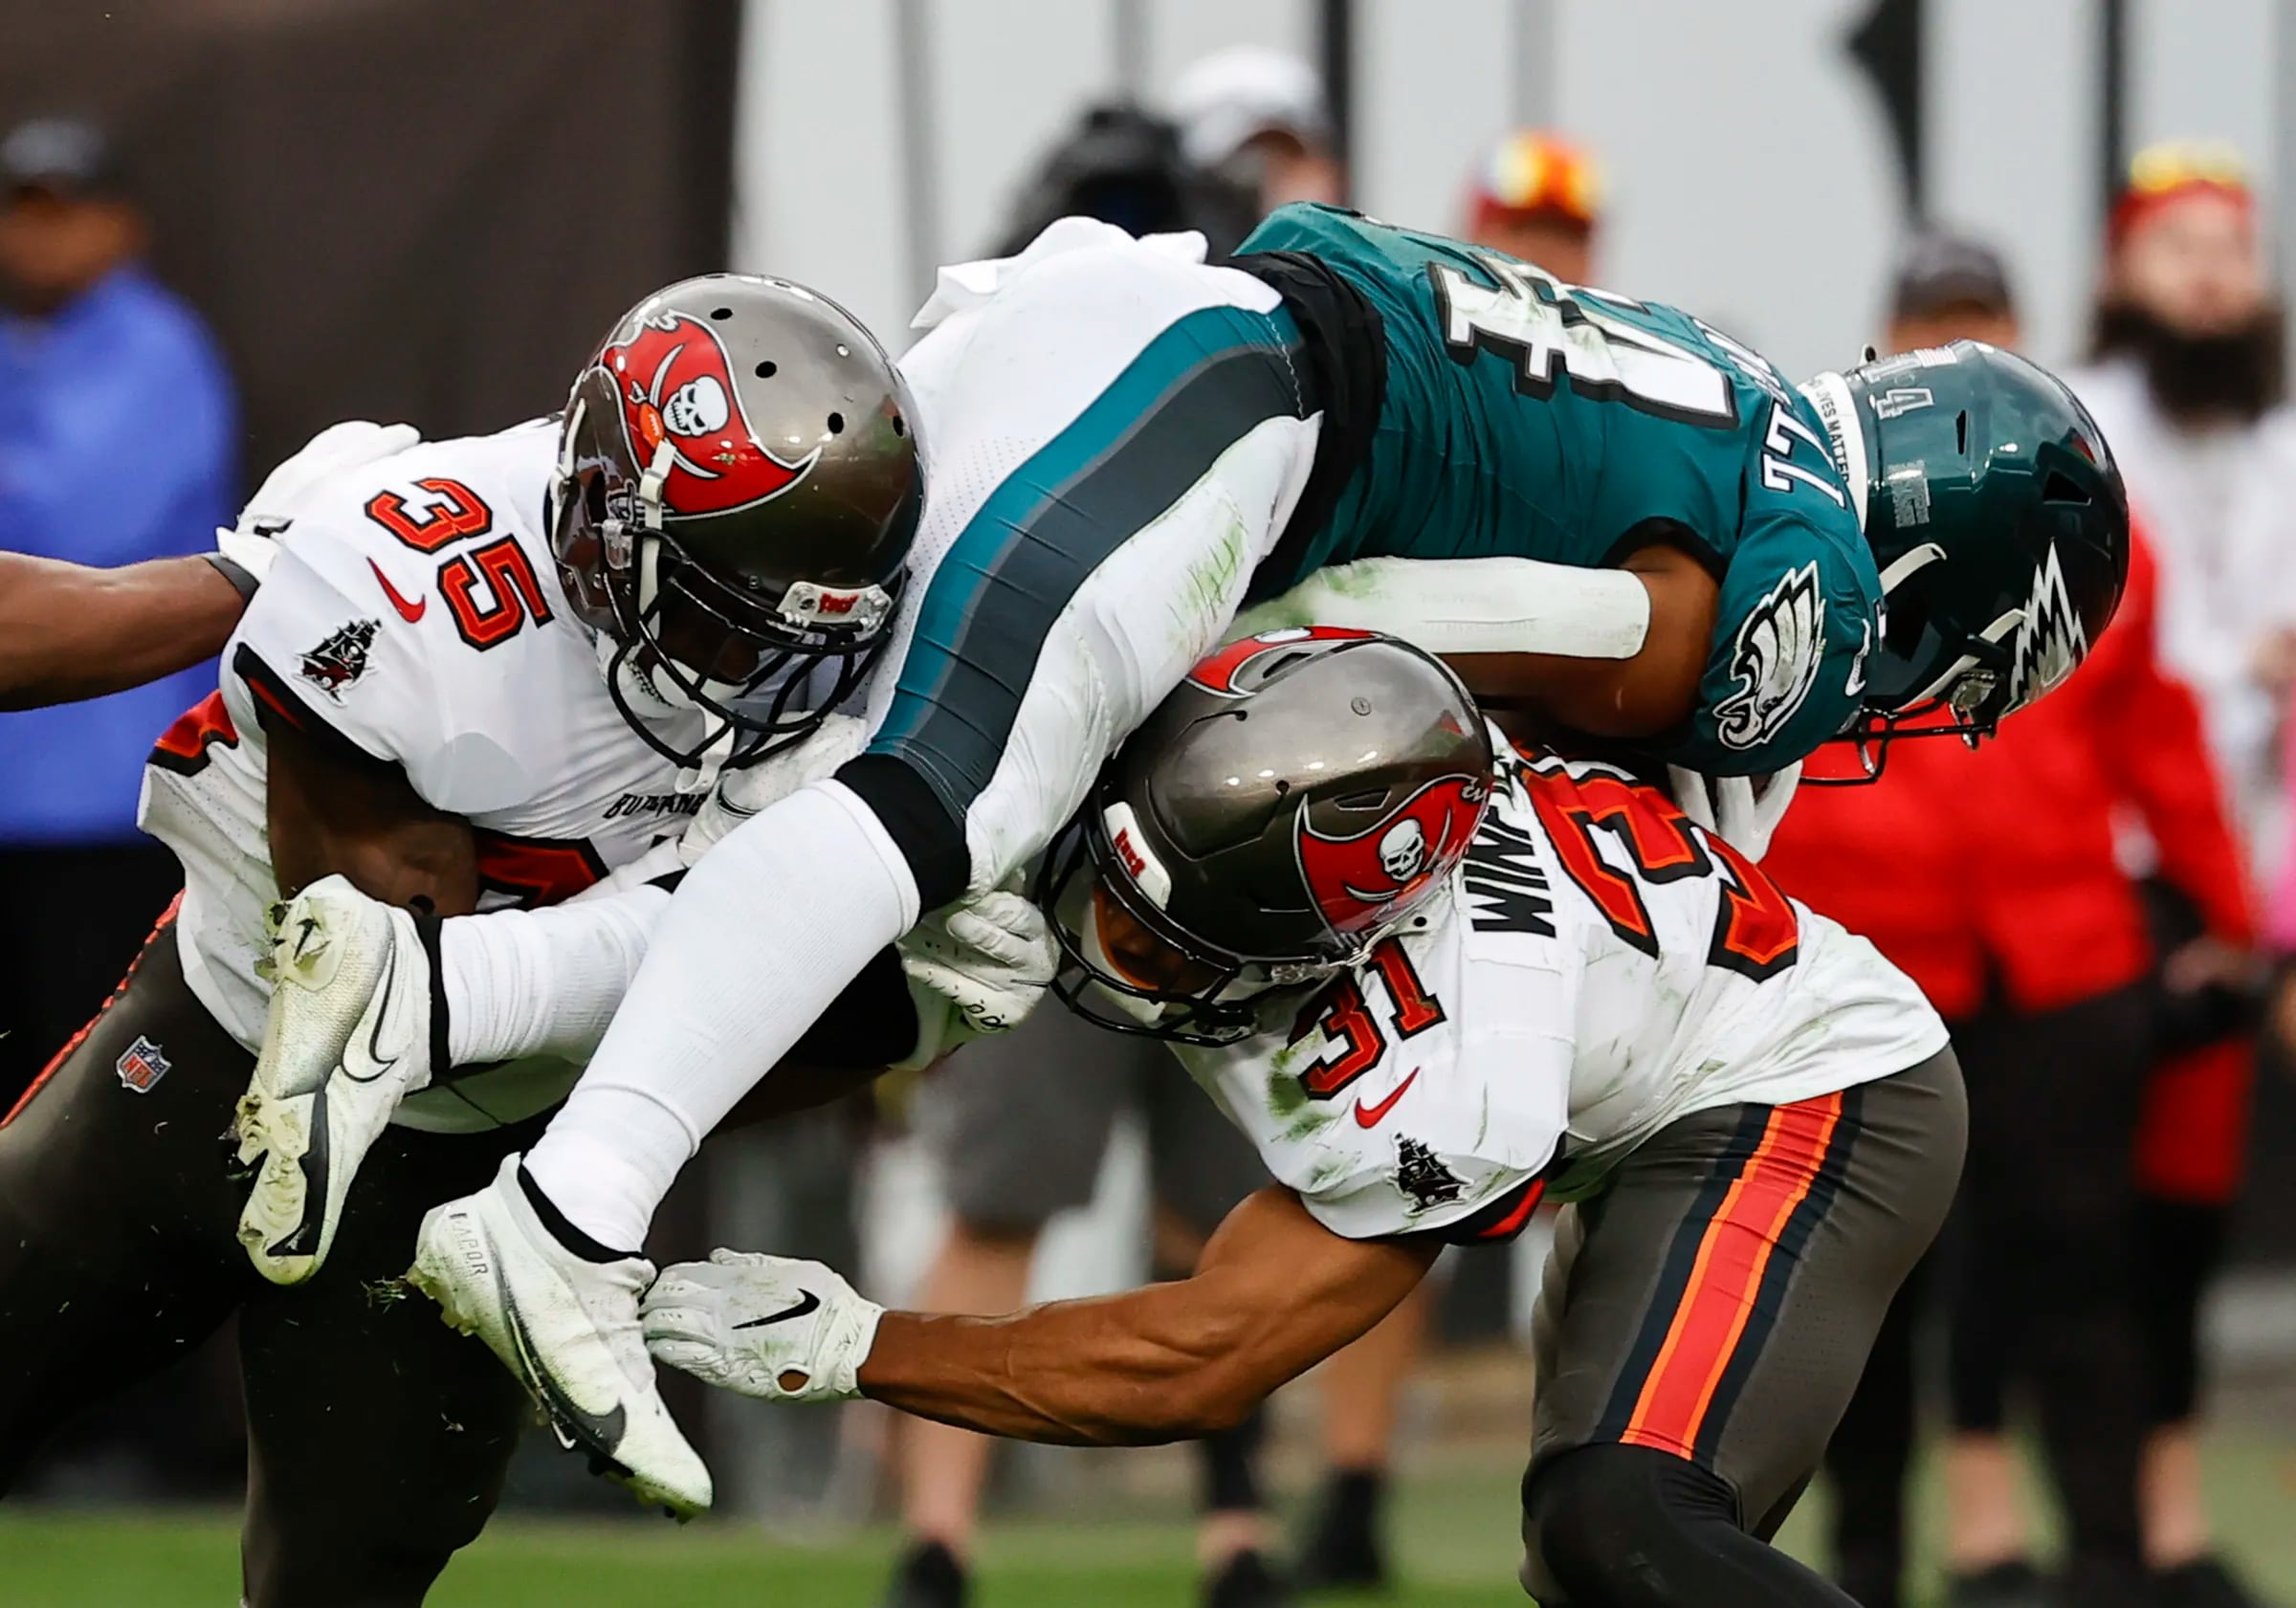 Photos from the Eagles' 31-15 playoff loss to the Tampa Bay Buccaneers